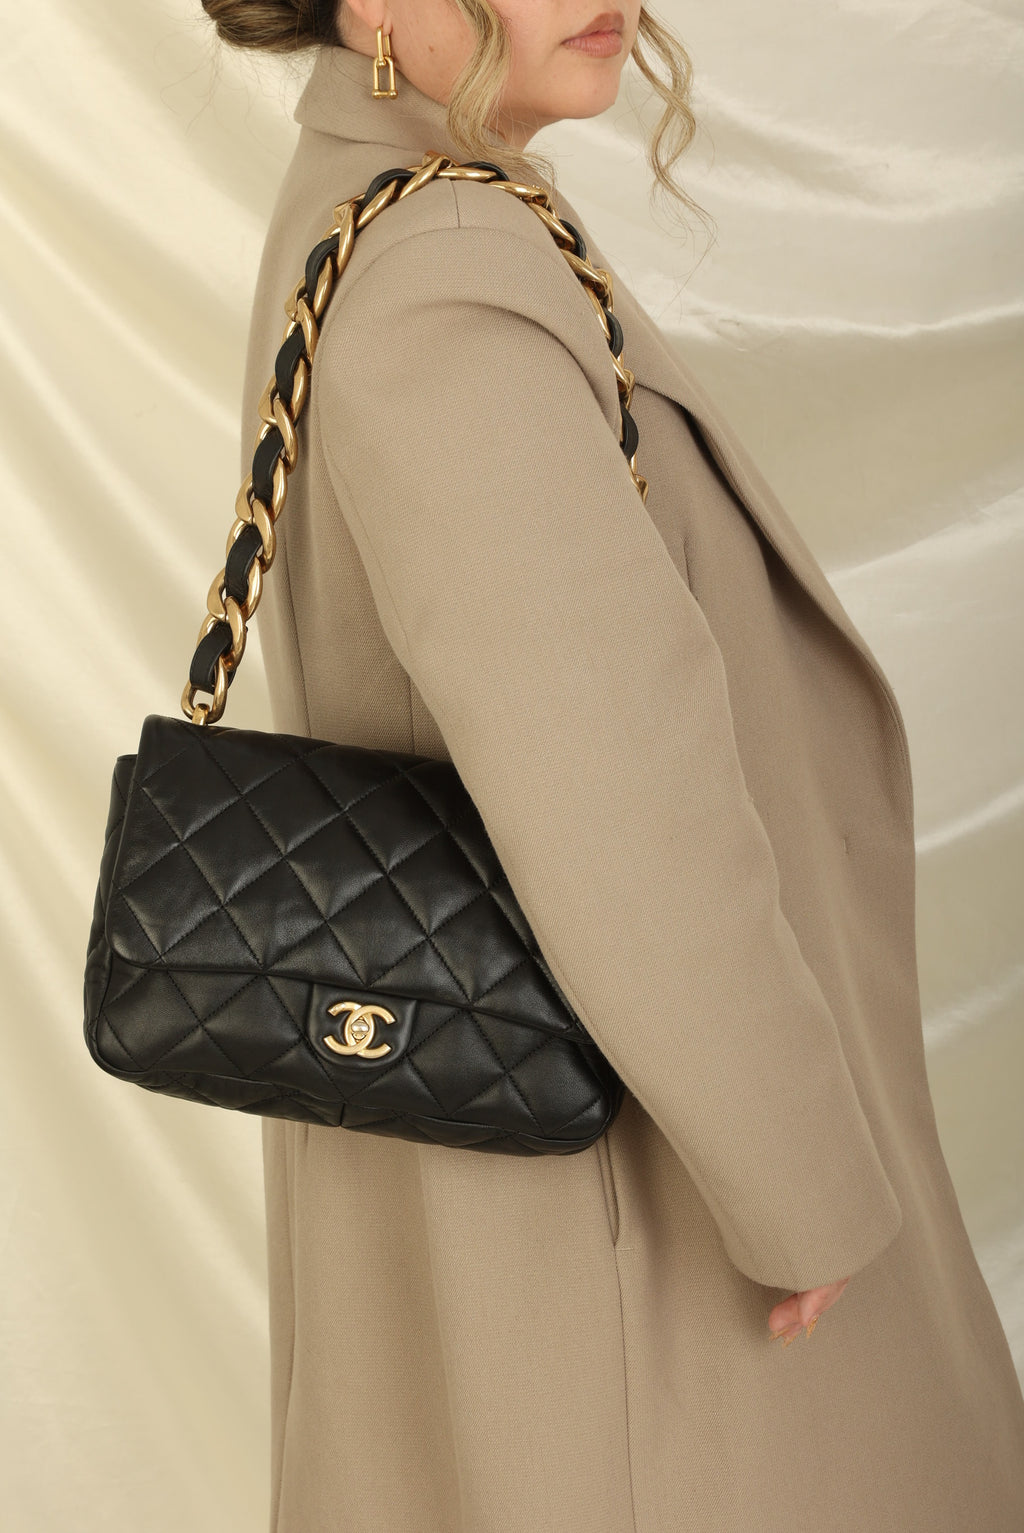 Past Bag Drops – Tagged Chanel – Page 4 – SFN